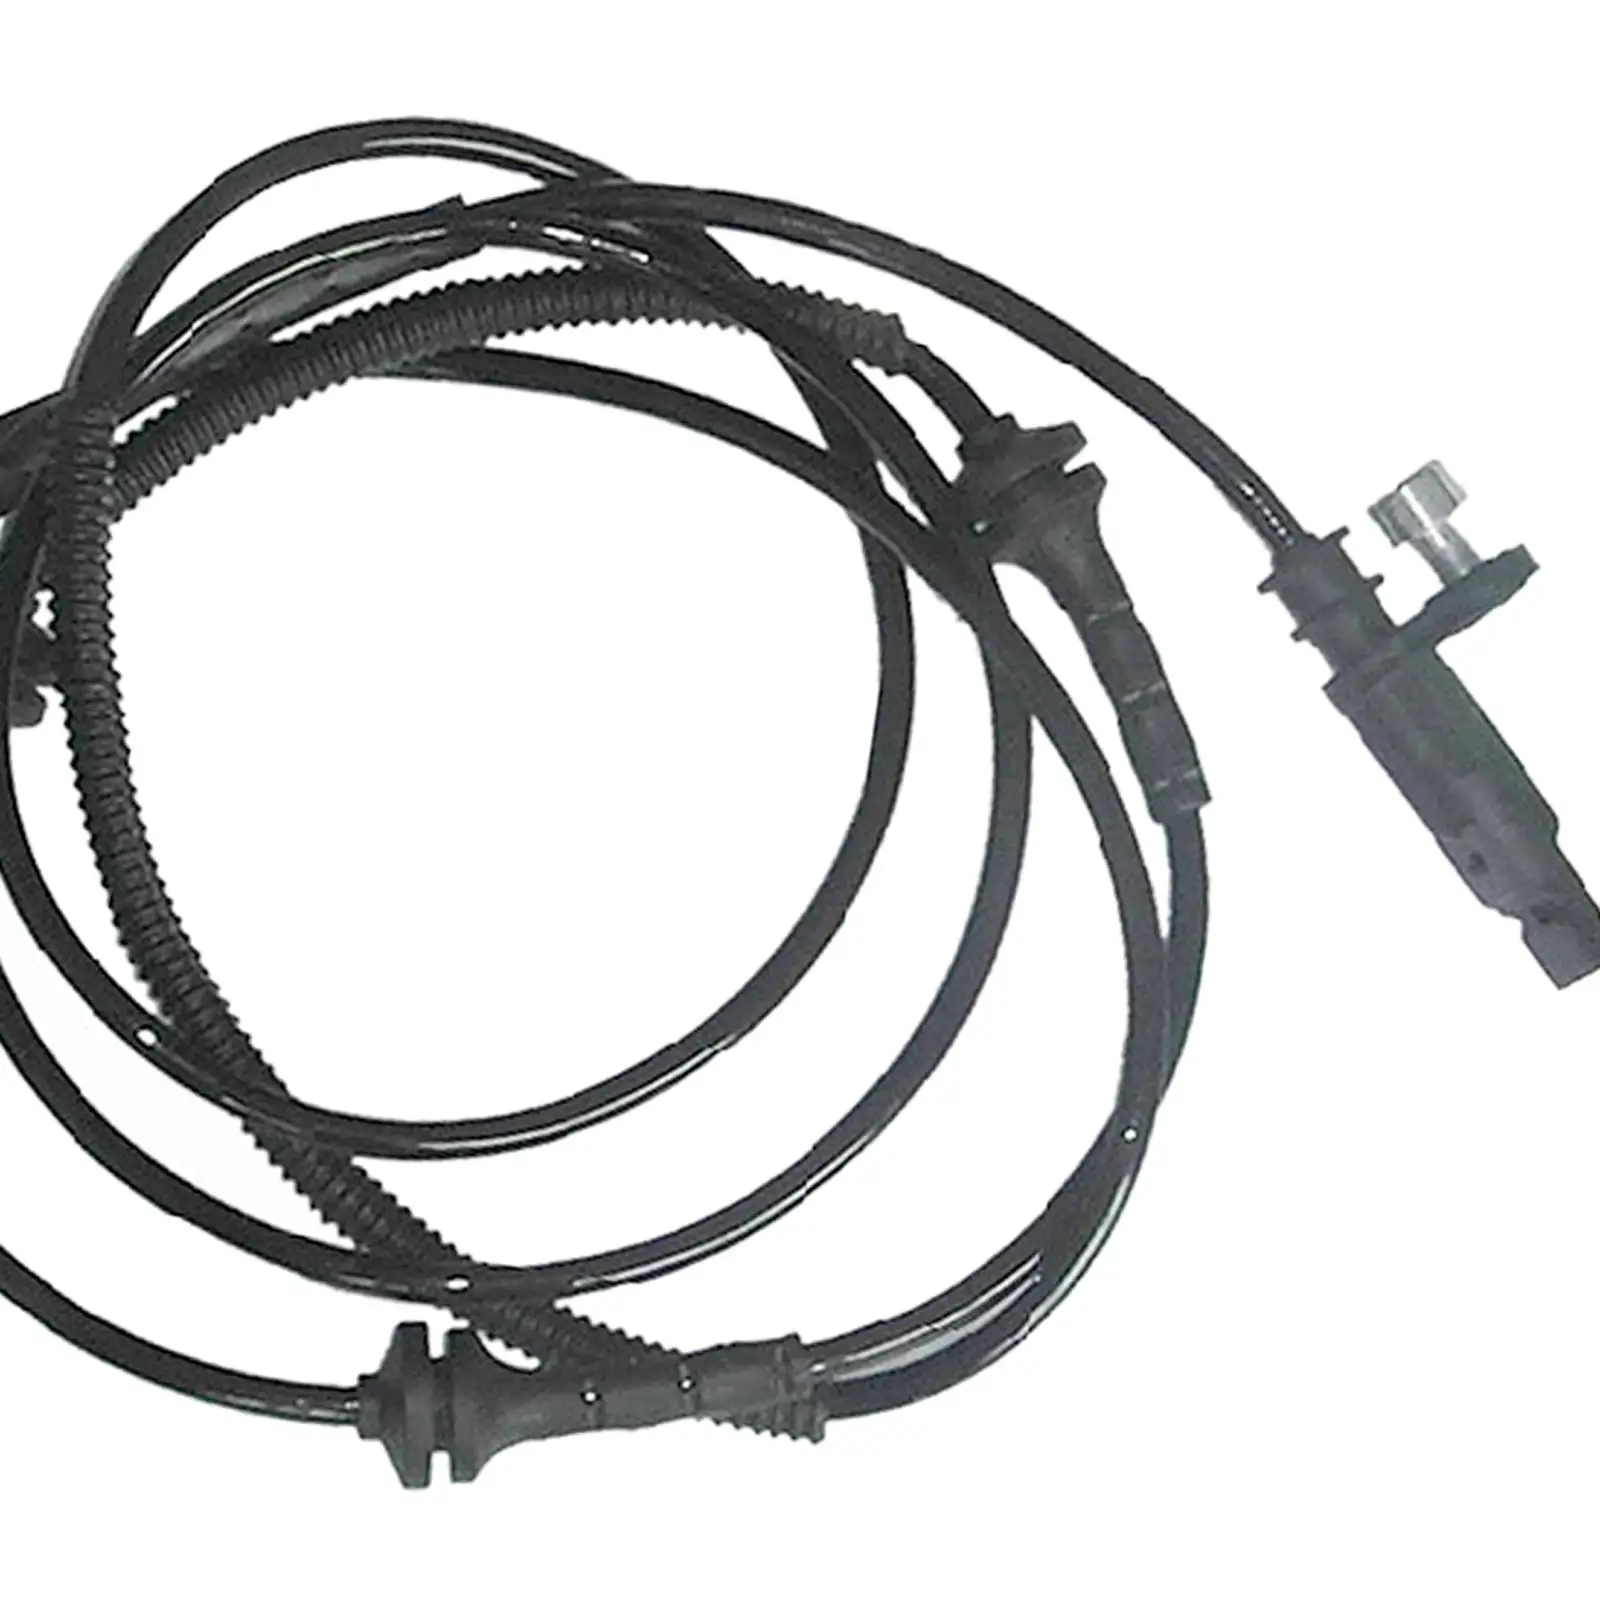 ABS Wheel Sensor, 4545g7 fit for 407 Coupe 407 SW 9664699480